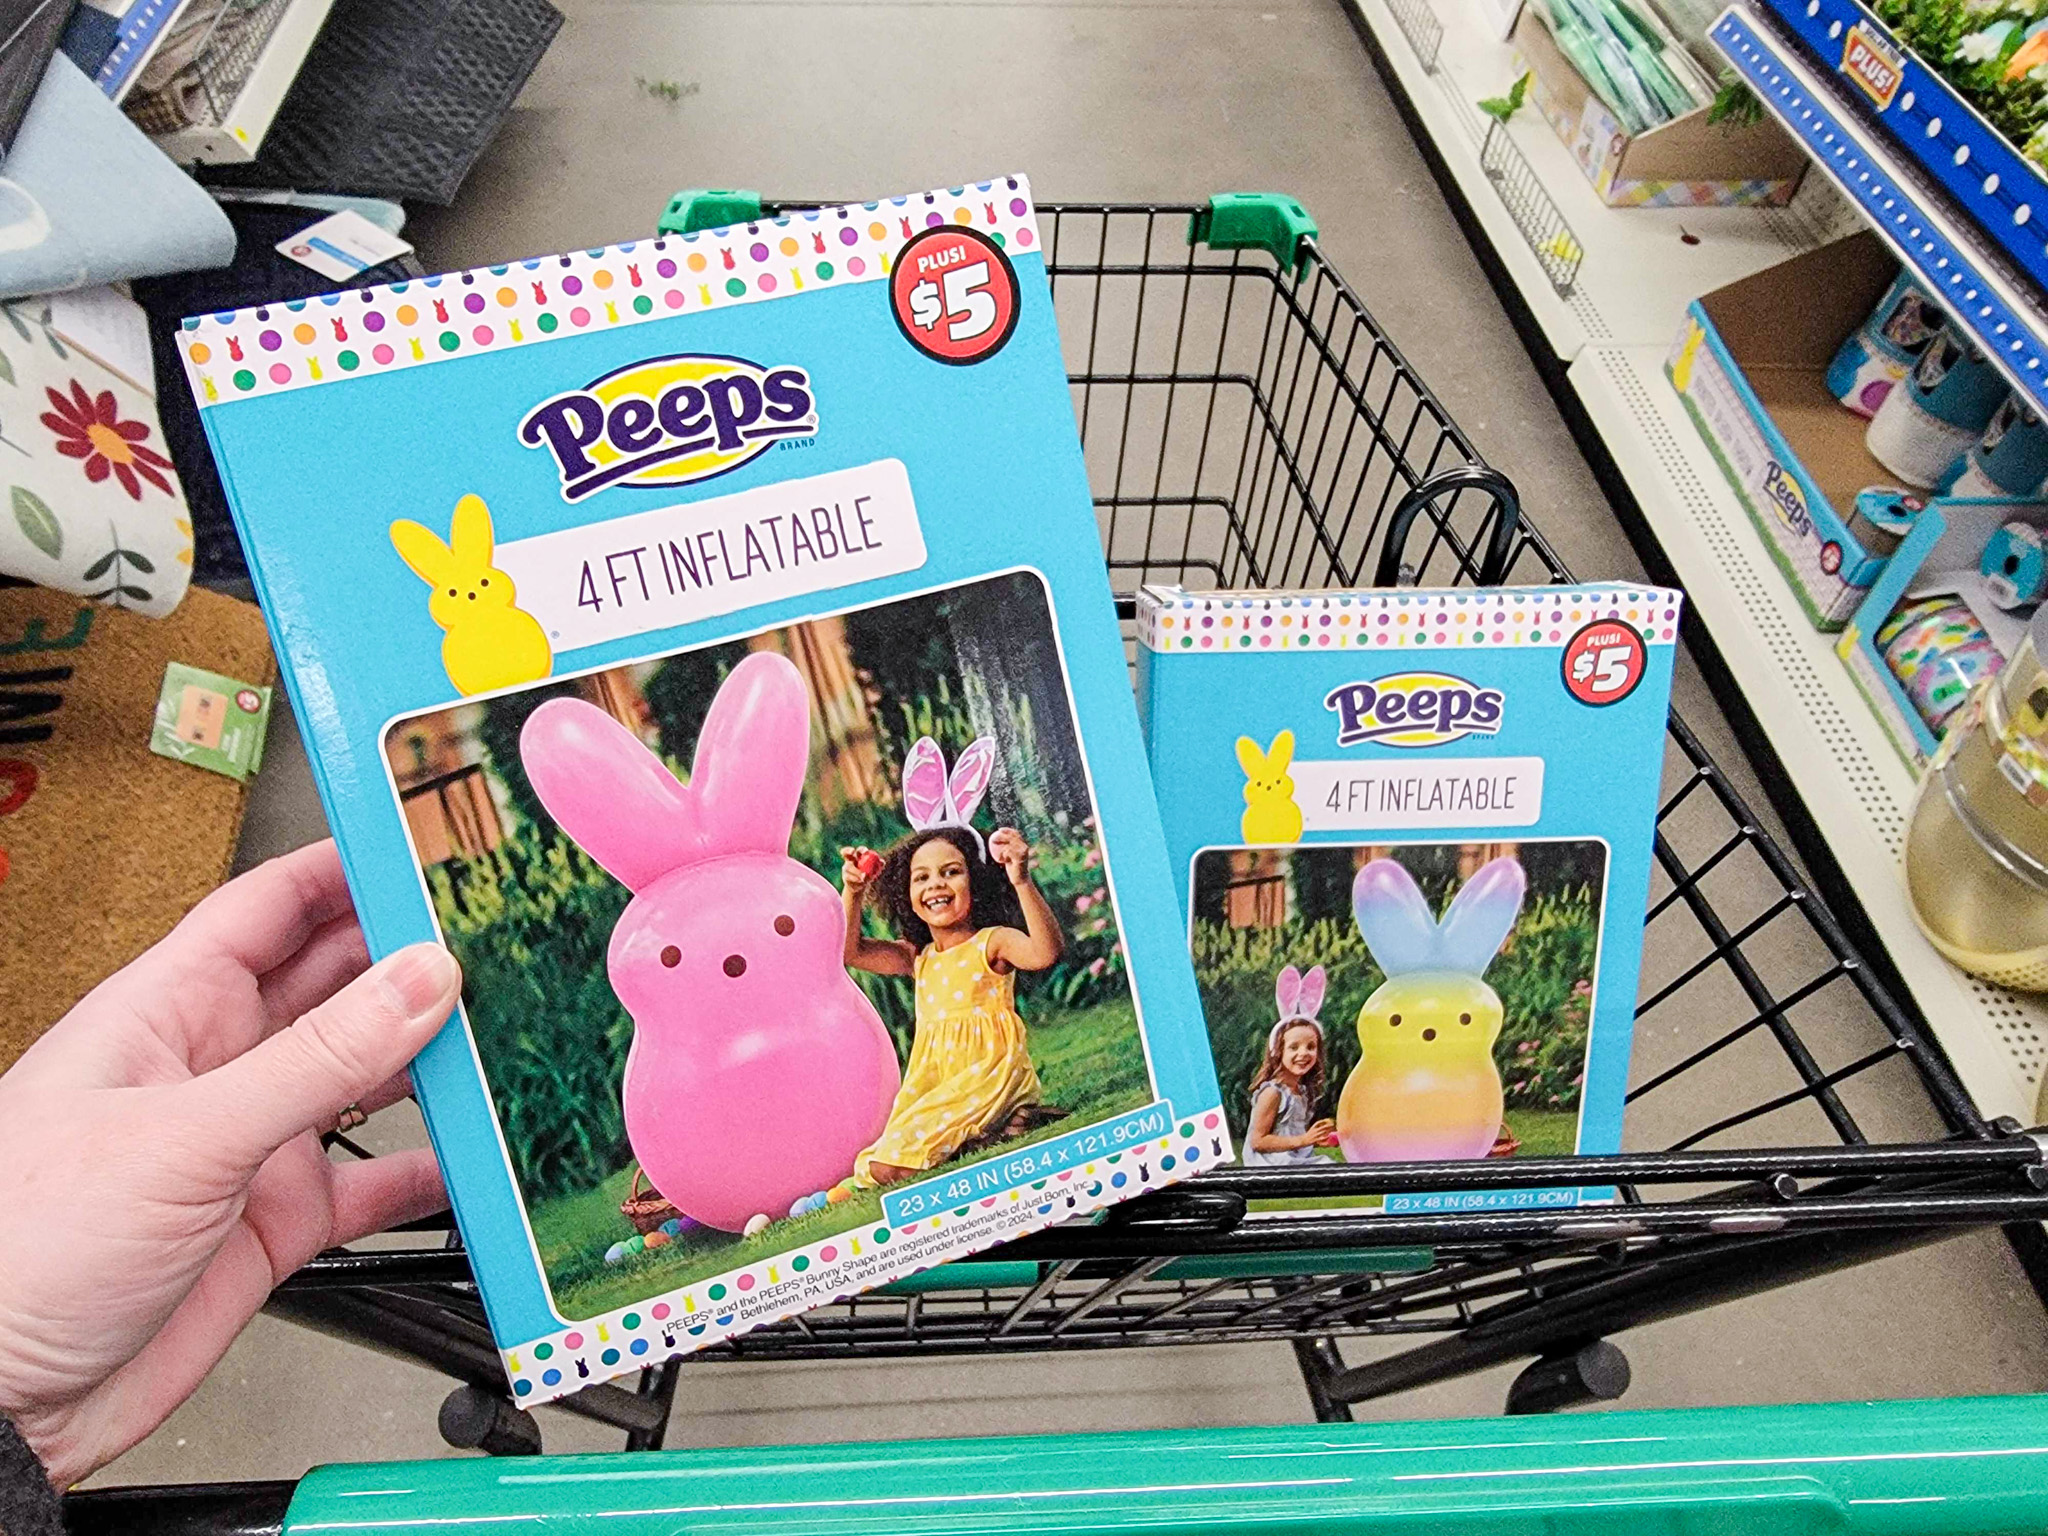 Dollar Tree Plus: Latest Deals for $3 to $5 - The Krazy Coupon Lady